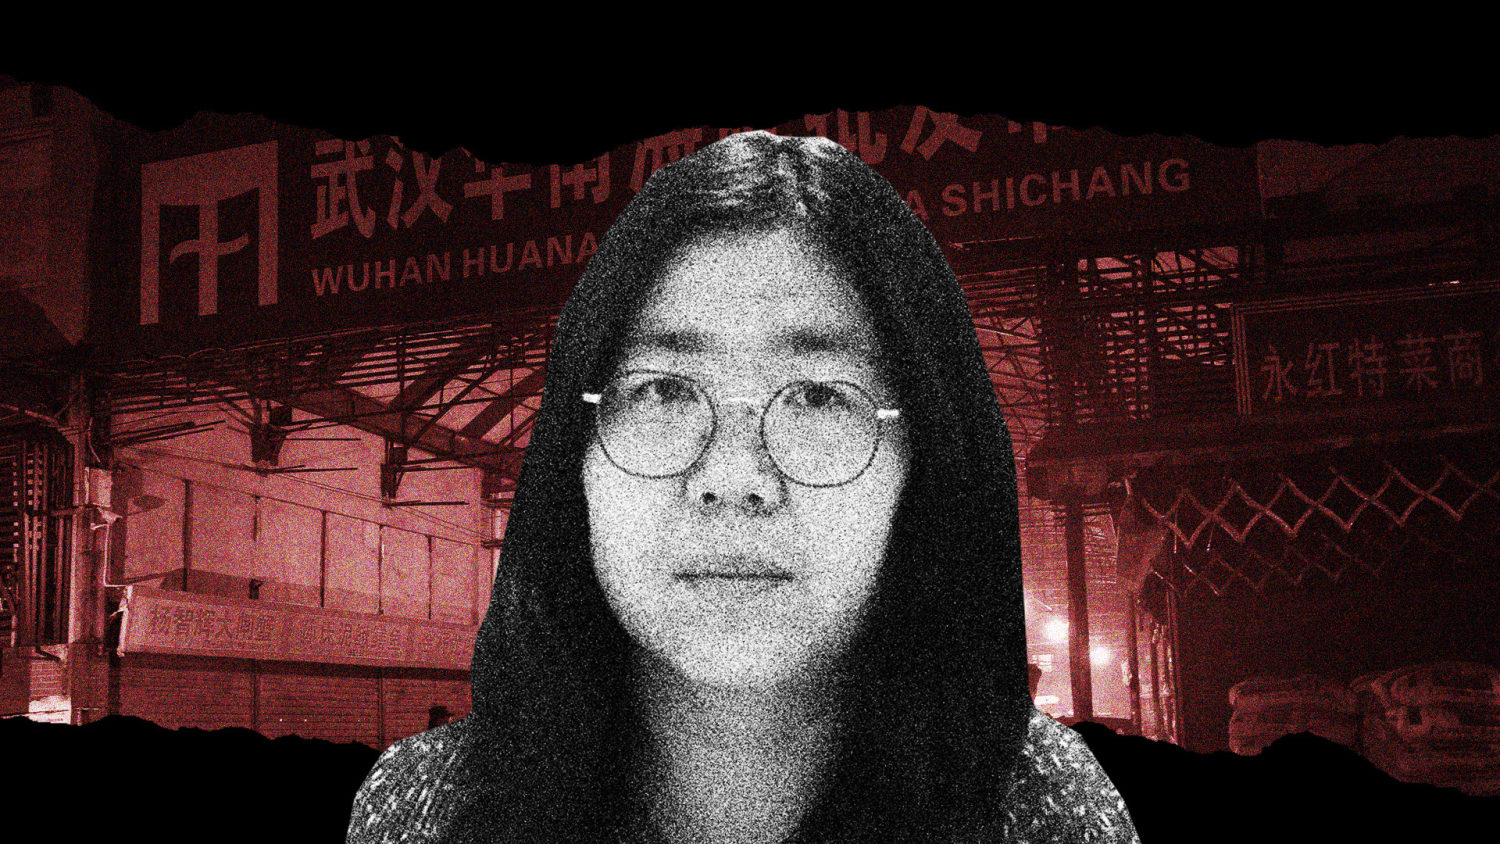 A reporter risked her life to show the world Covid in Wuhan. Now she may not survive jail.